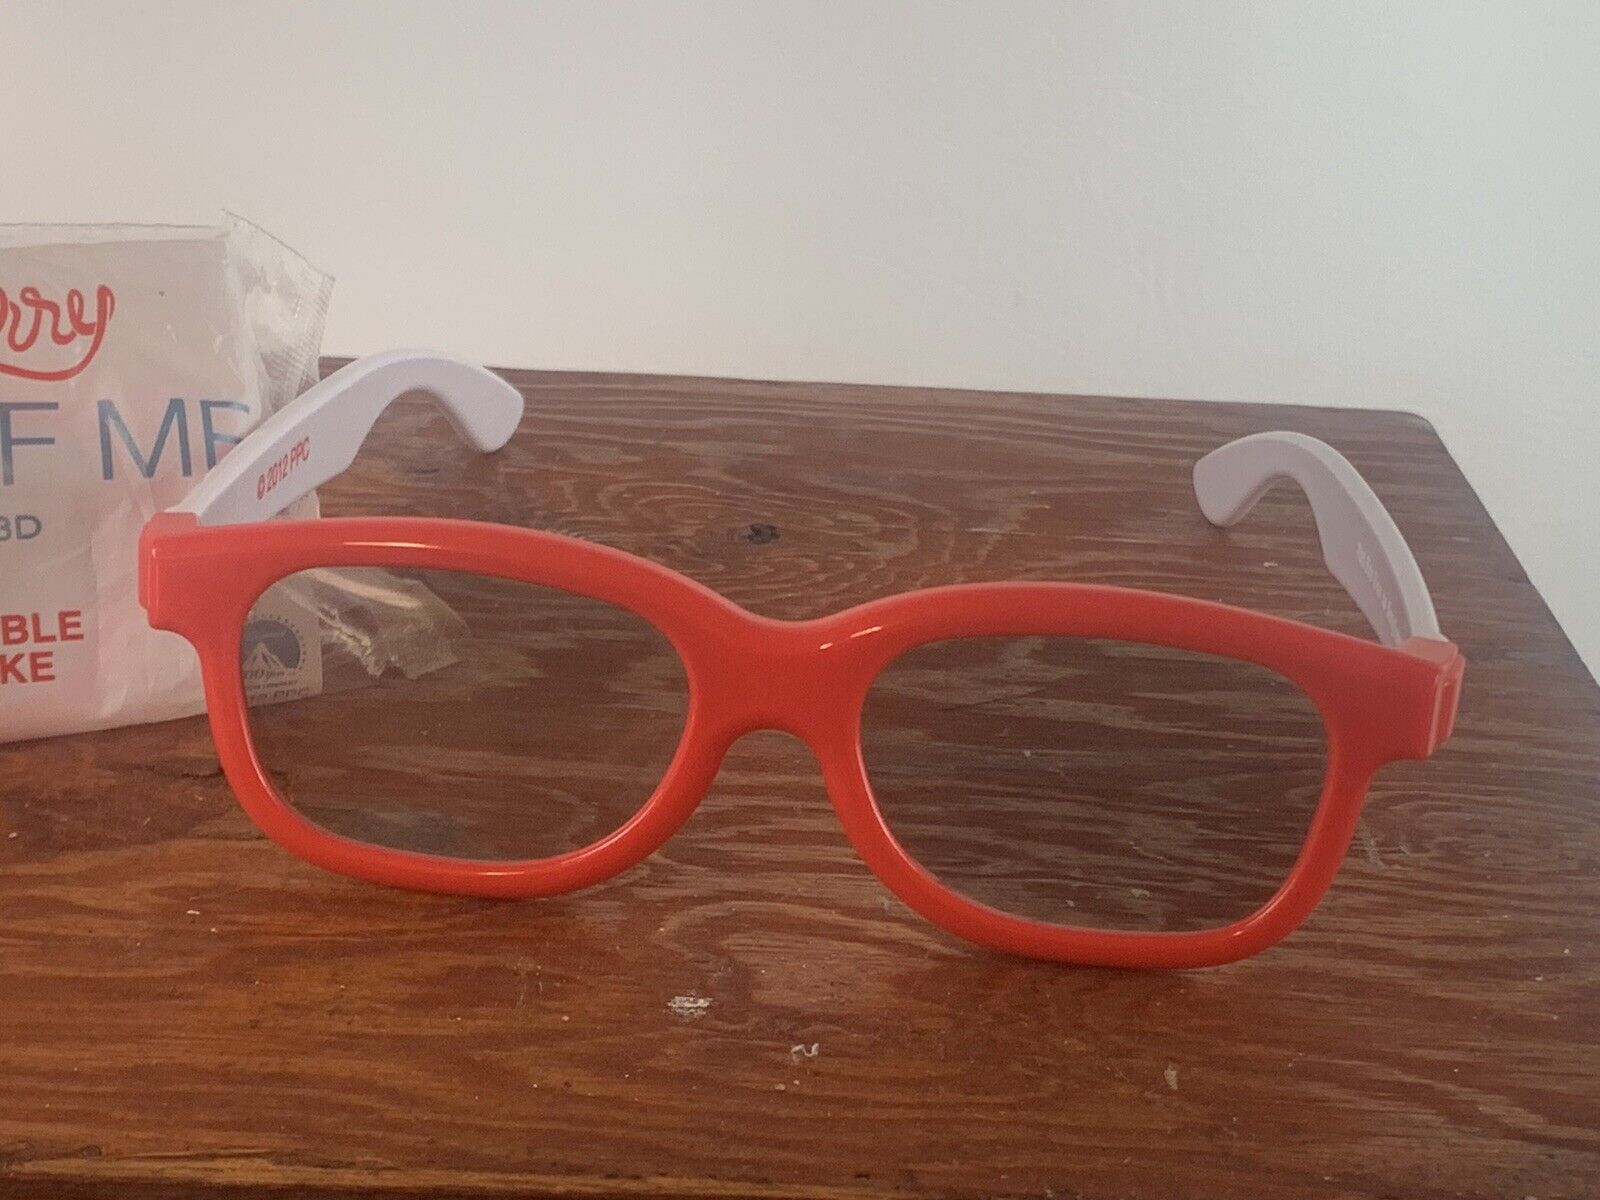 TWO Katy Perry Part of Me Real D 3D Glasses Collectible Keepsake One w/ Package! Без бренда - фотография #2